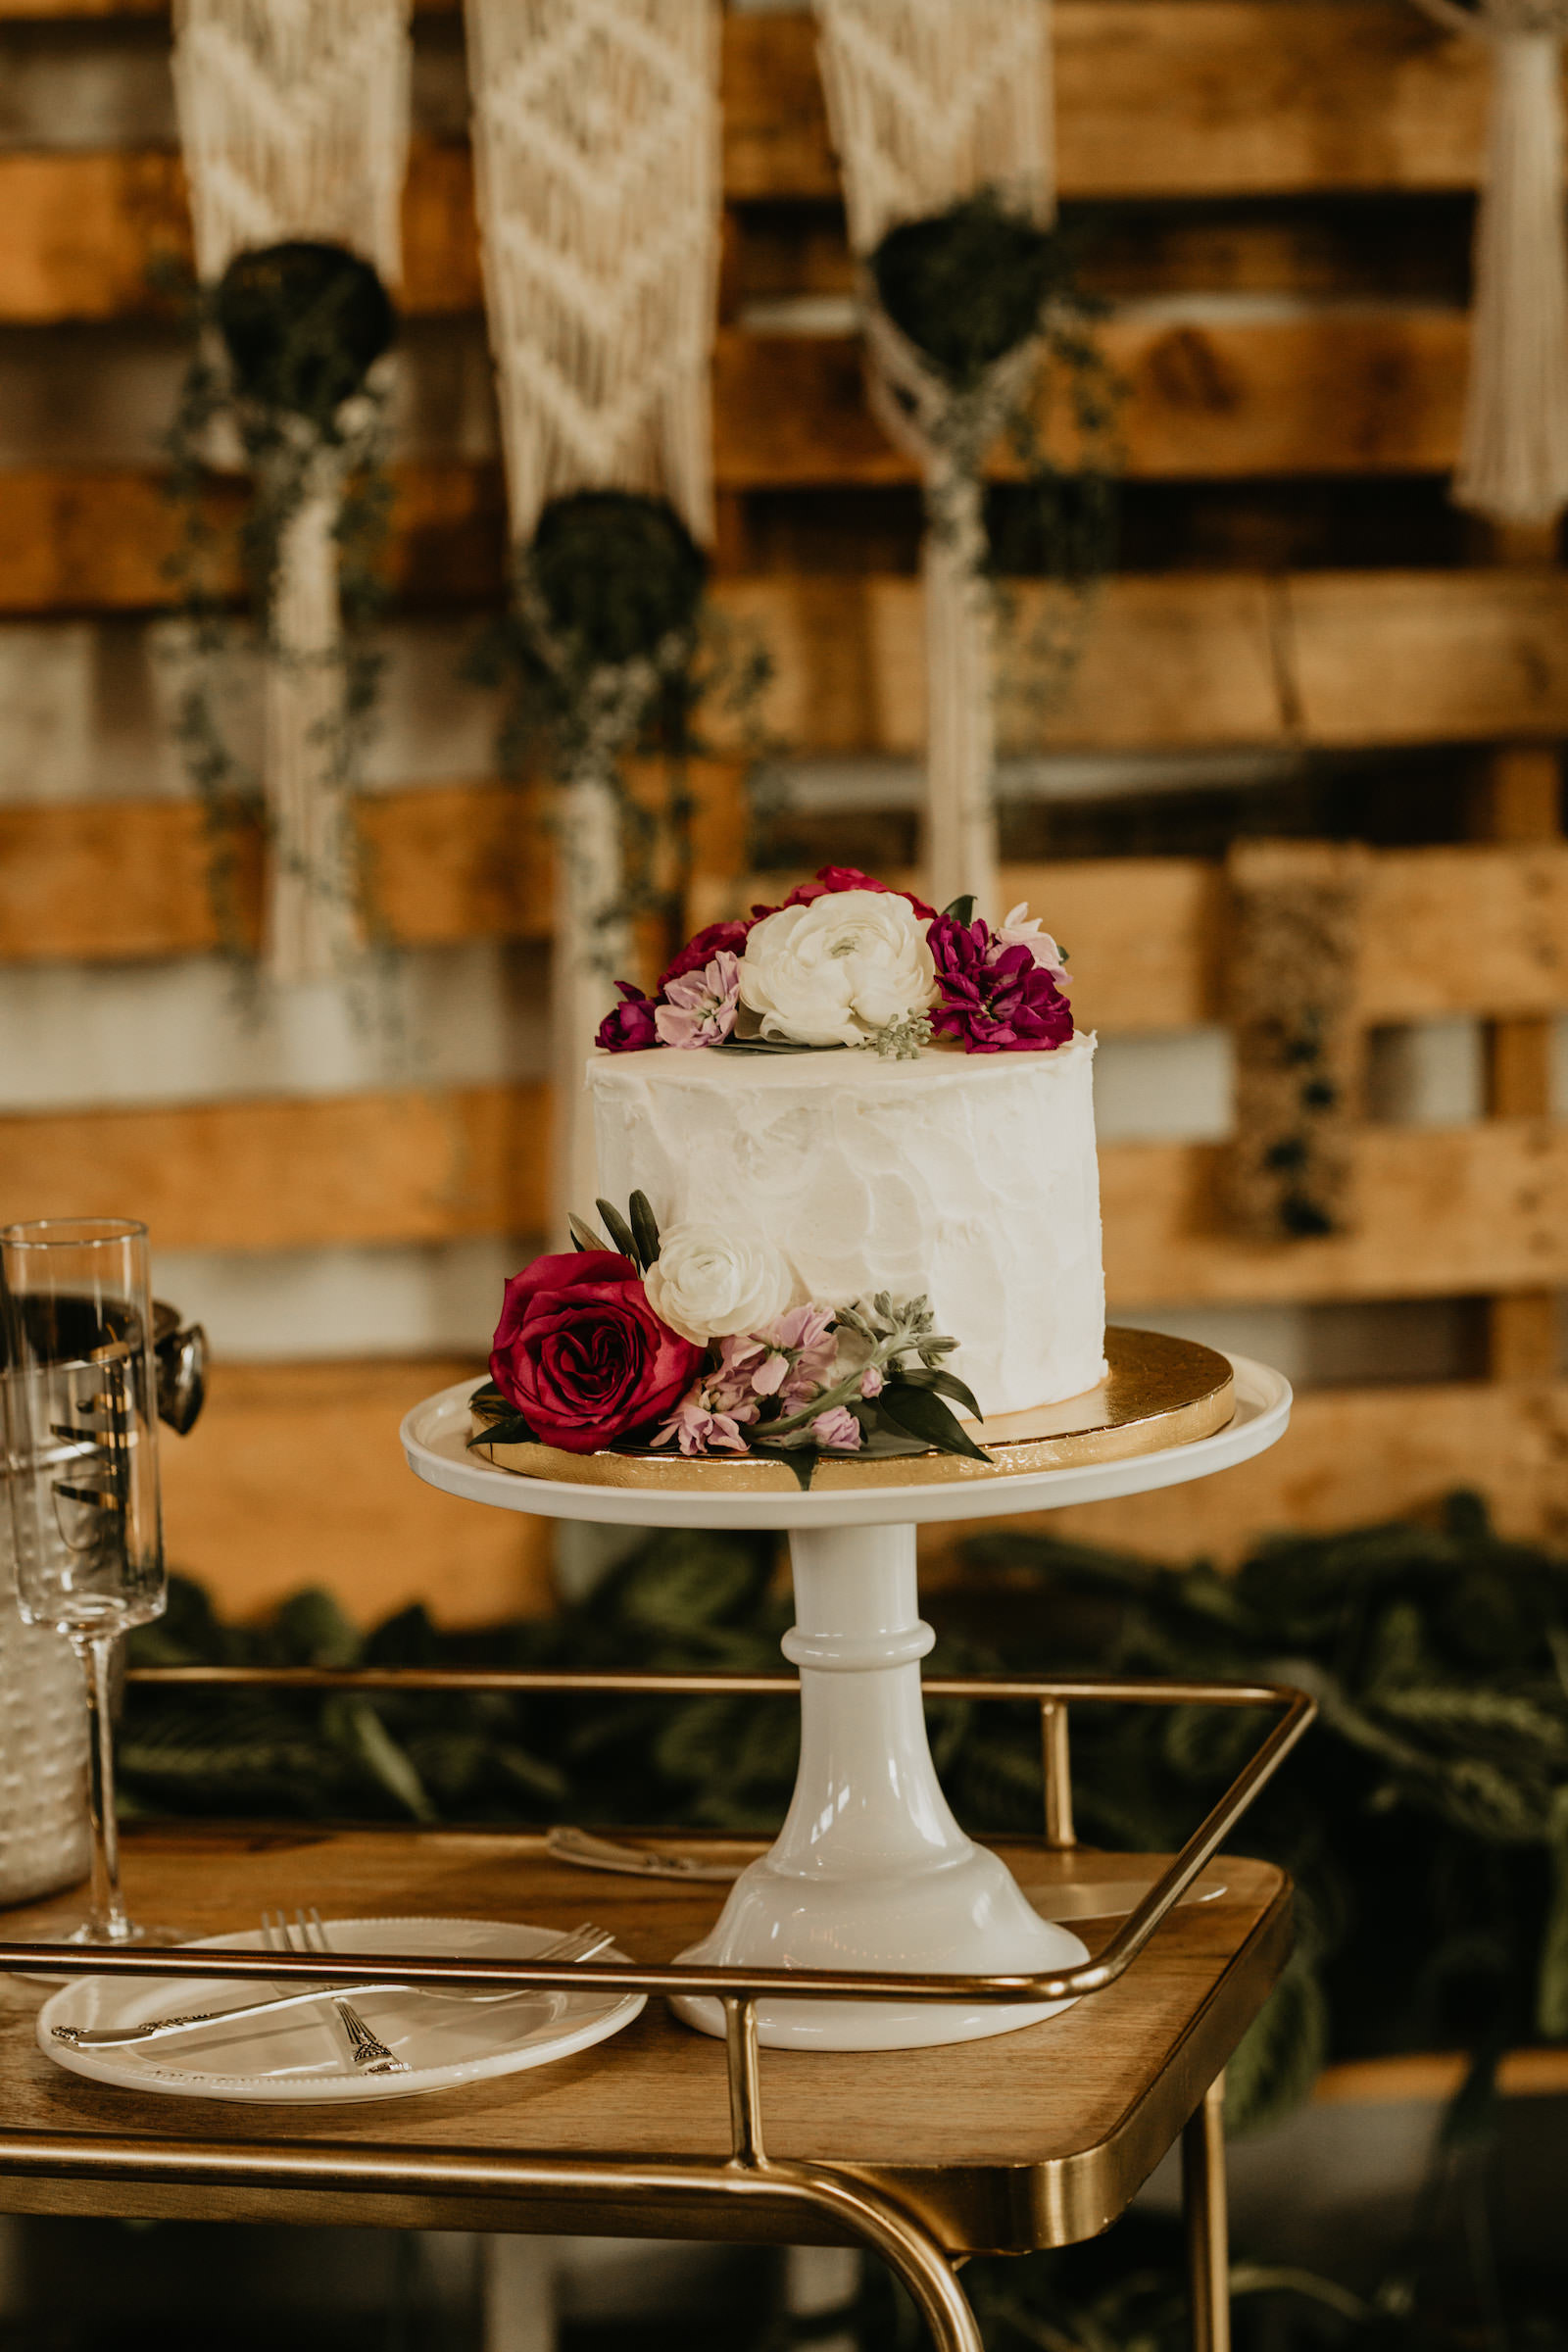 Simple One Tier White Textured Wedding Cake with Real Red, White and Pink Flowers | Tampa Bay Wedding Planner Elope Tampa Bay